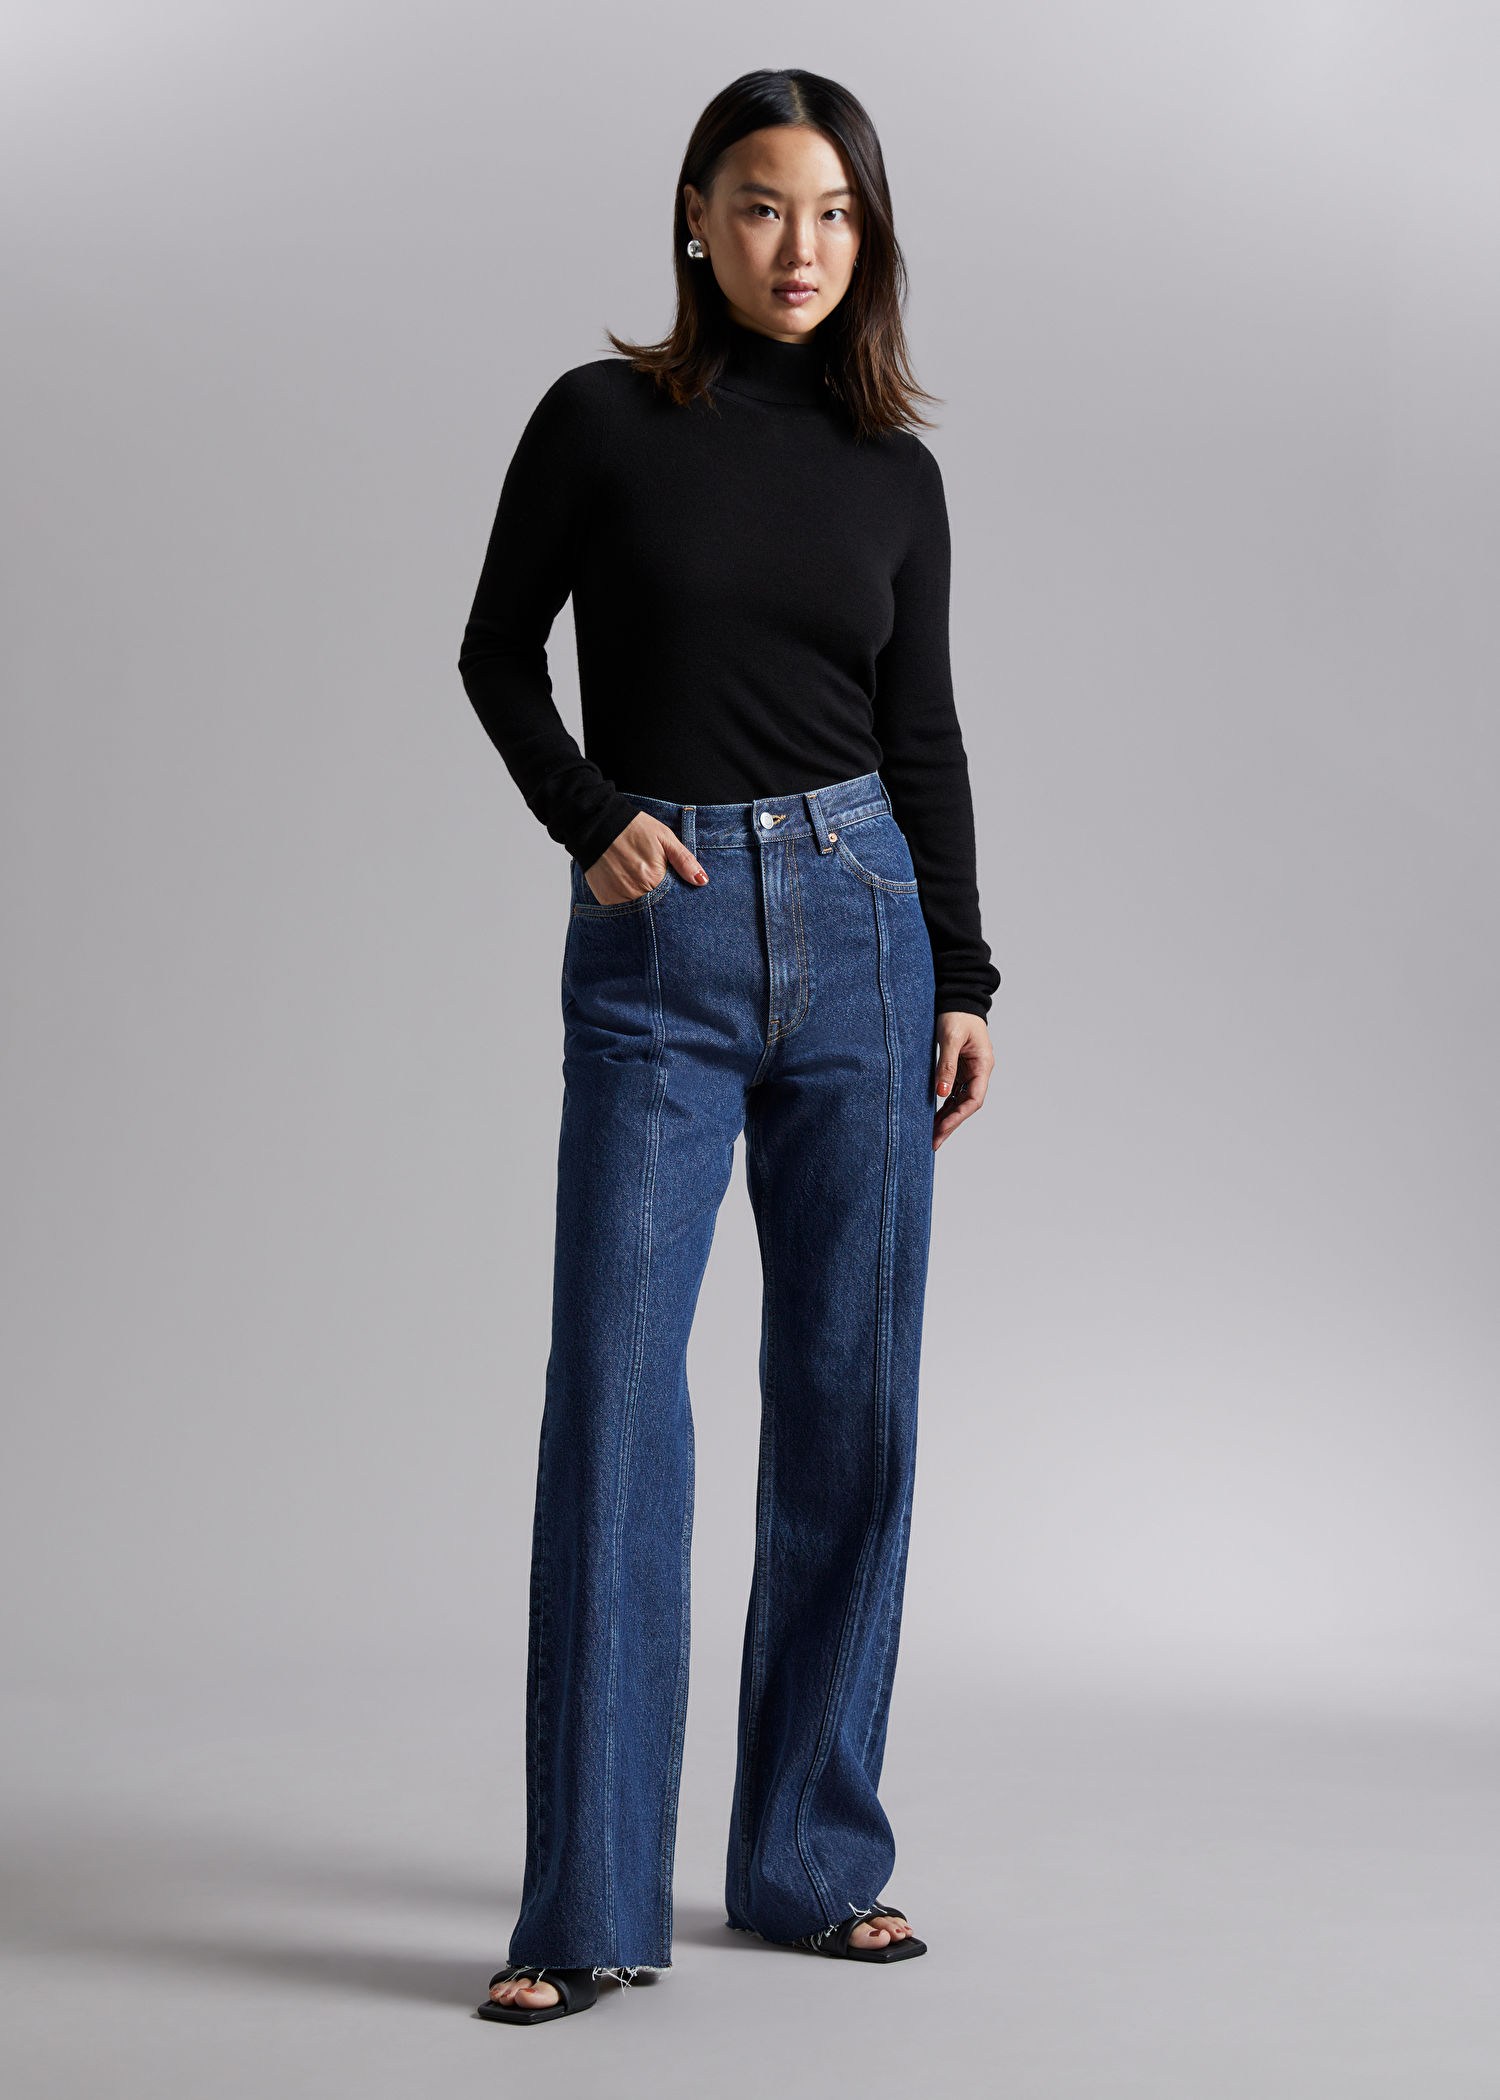 And Other Stories - merino wool turtleneck sweater